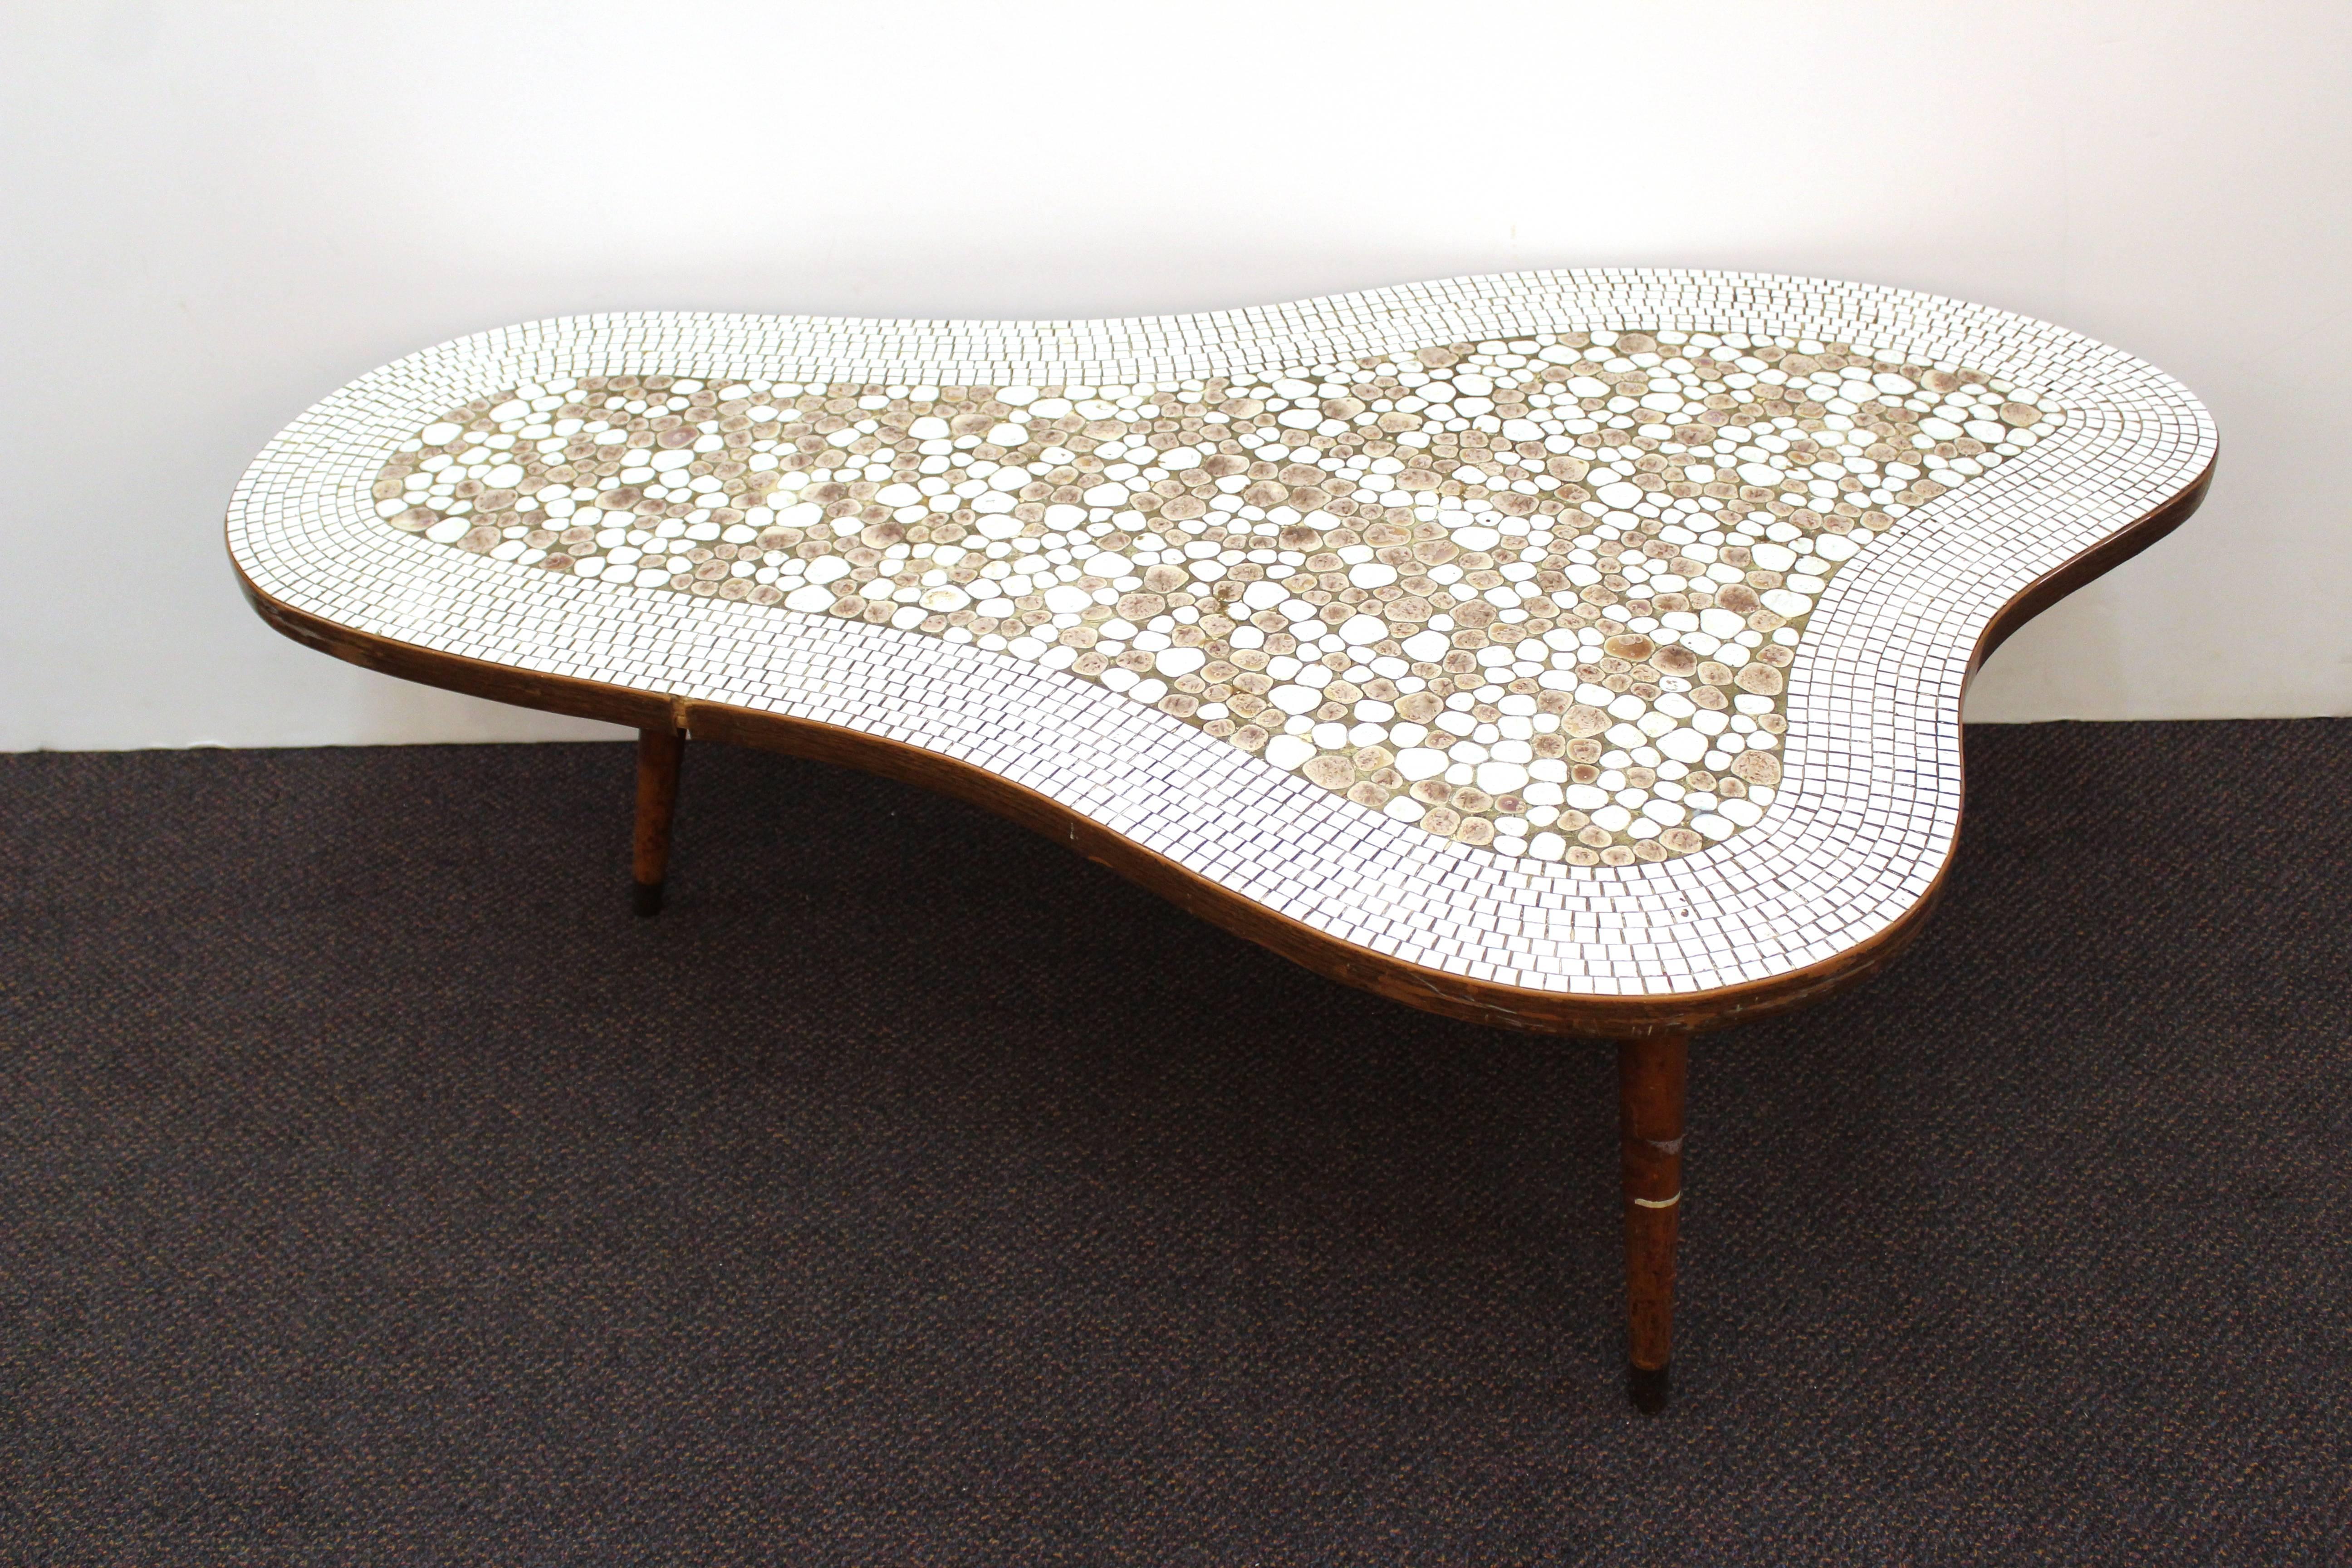 This Mid-Century coffee table features a mosaic stone top in white and grey. It is in an organic form and rests on three wooden legs. There are a few cracks and scuffs but this table is in overall good vintage condition. 110908.